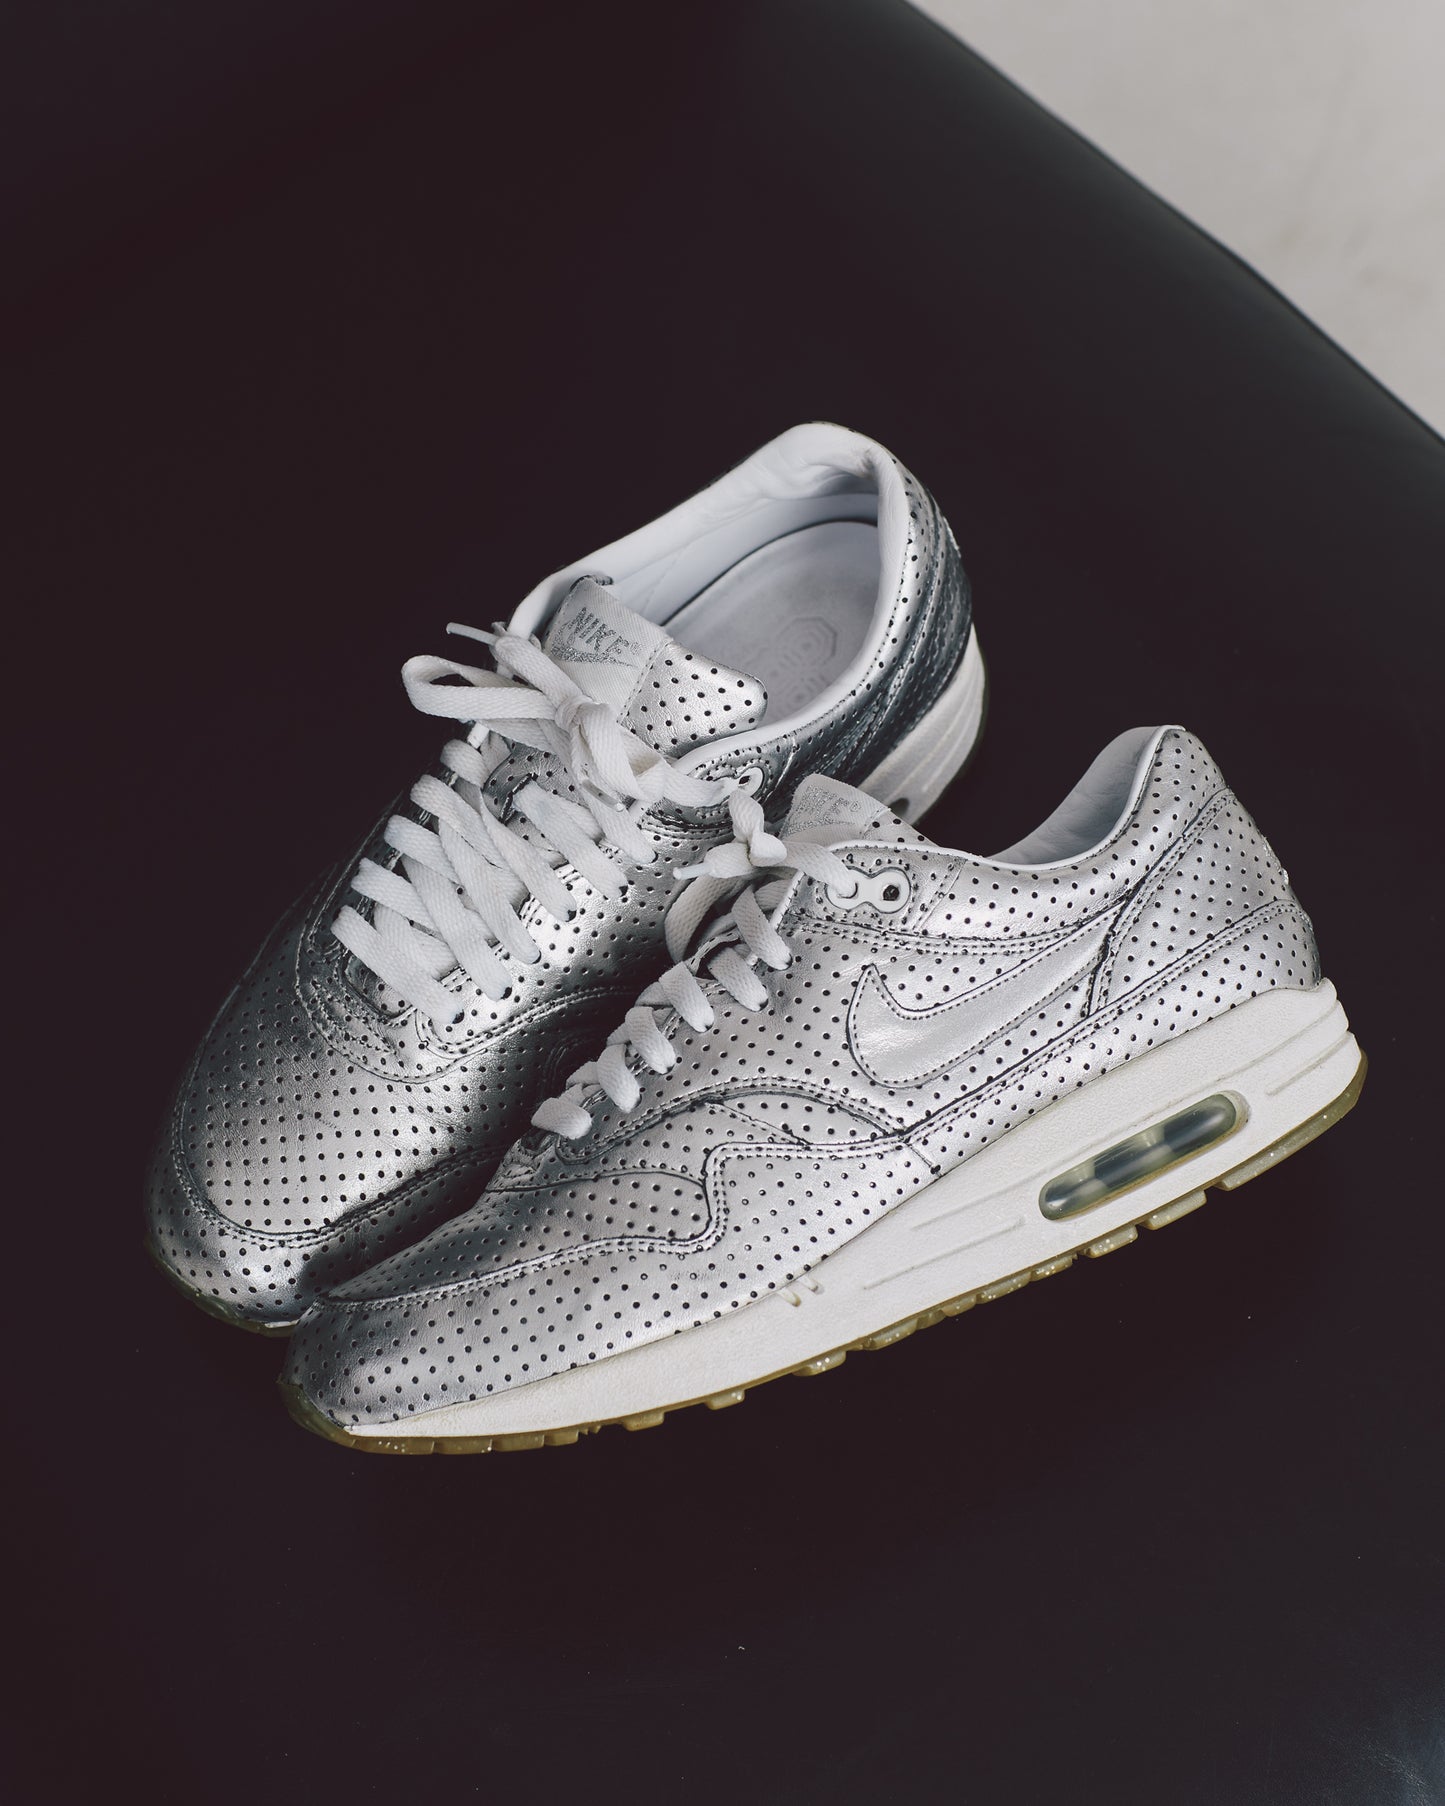 Nike x Opening Ceremony Air Max 1 (9.5) silver